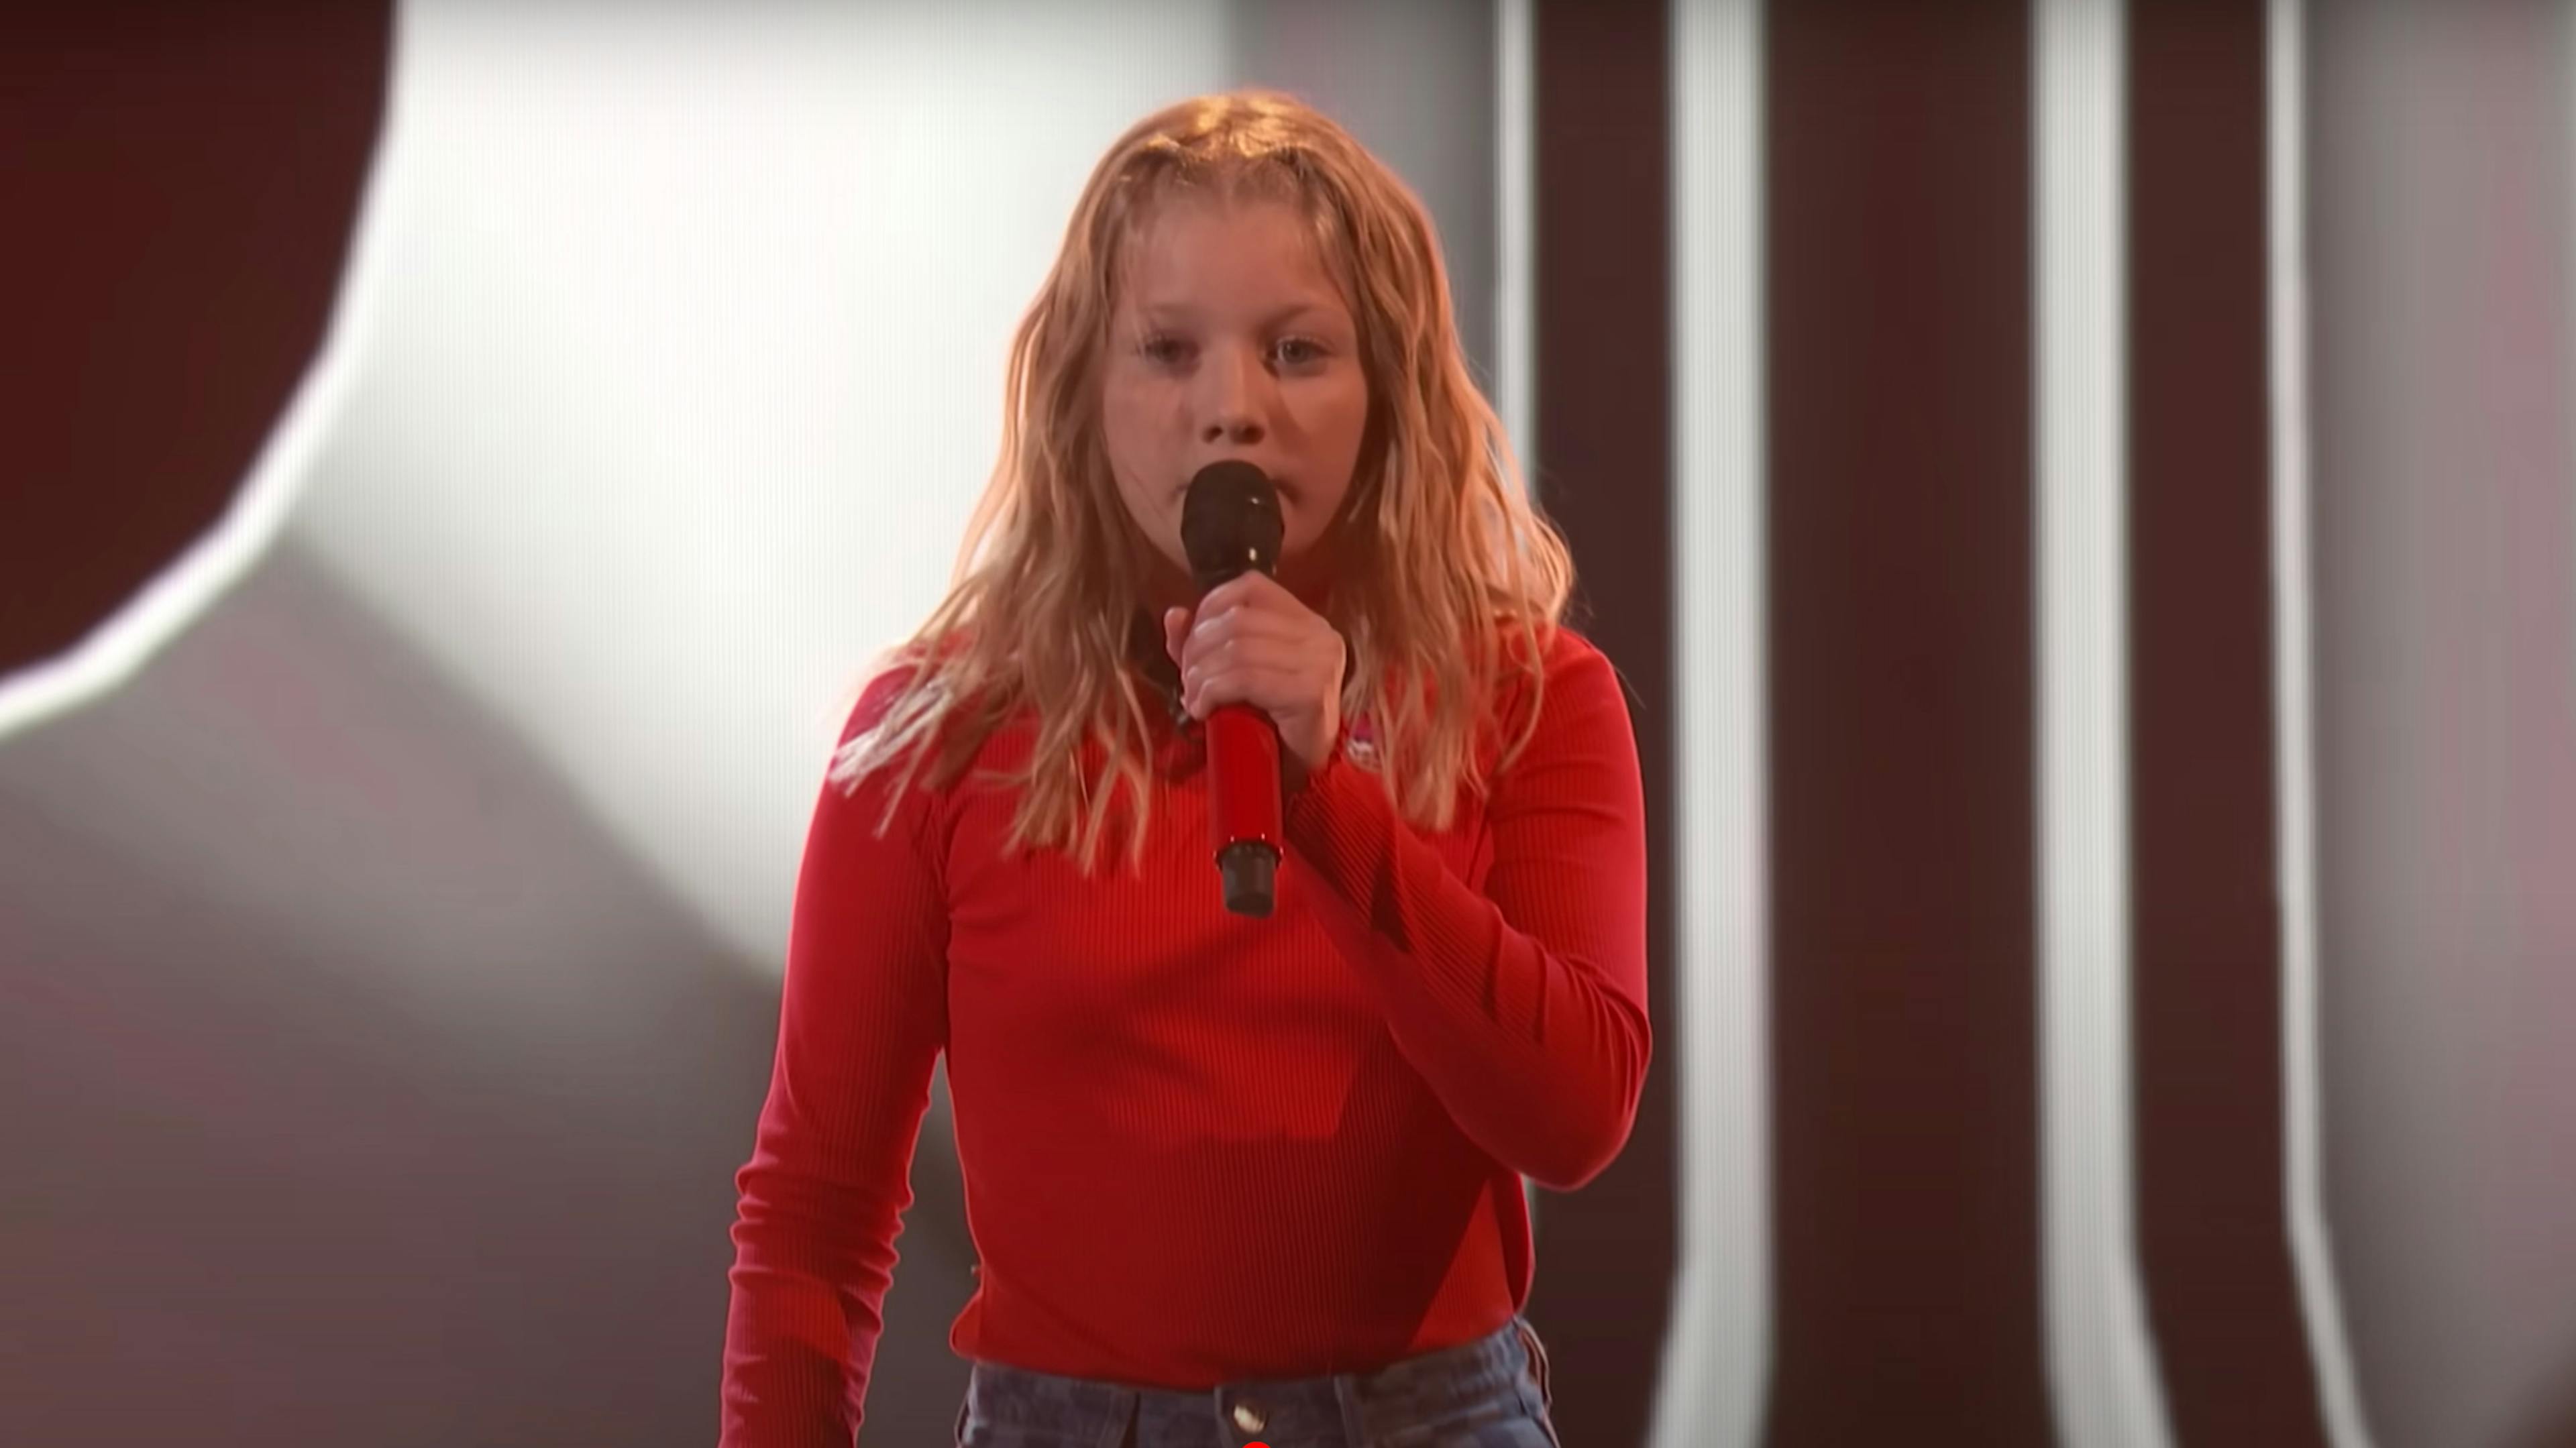 10-year-old sensation Harper covers Ed Sheeran and Bring Me The Horizon on America’s Got Talent